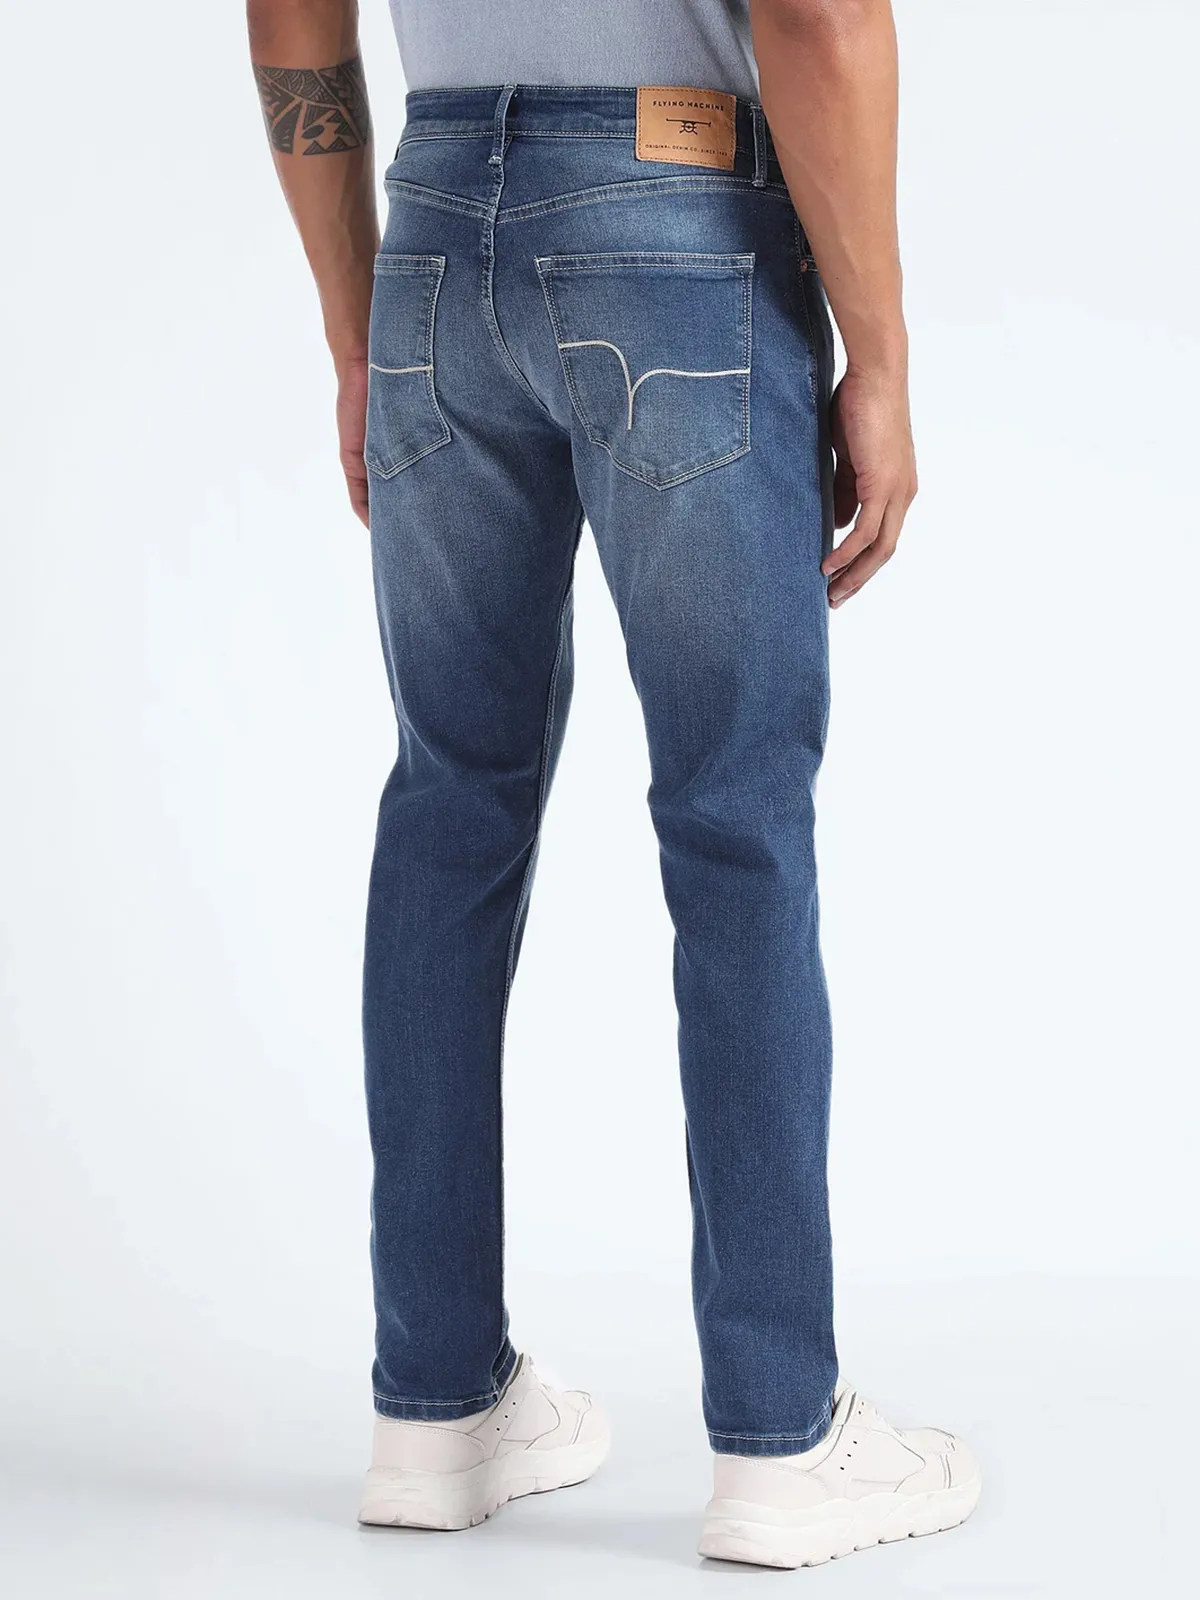 Flying Machine blue slim tapered fit jeans